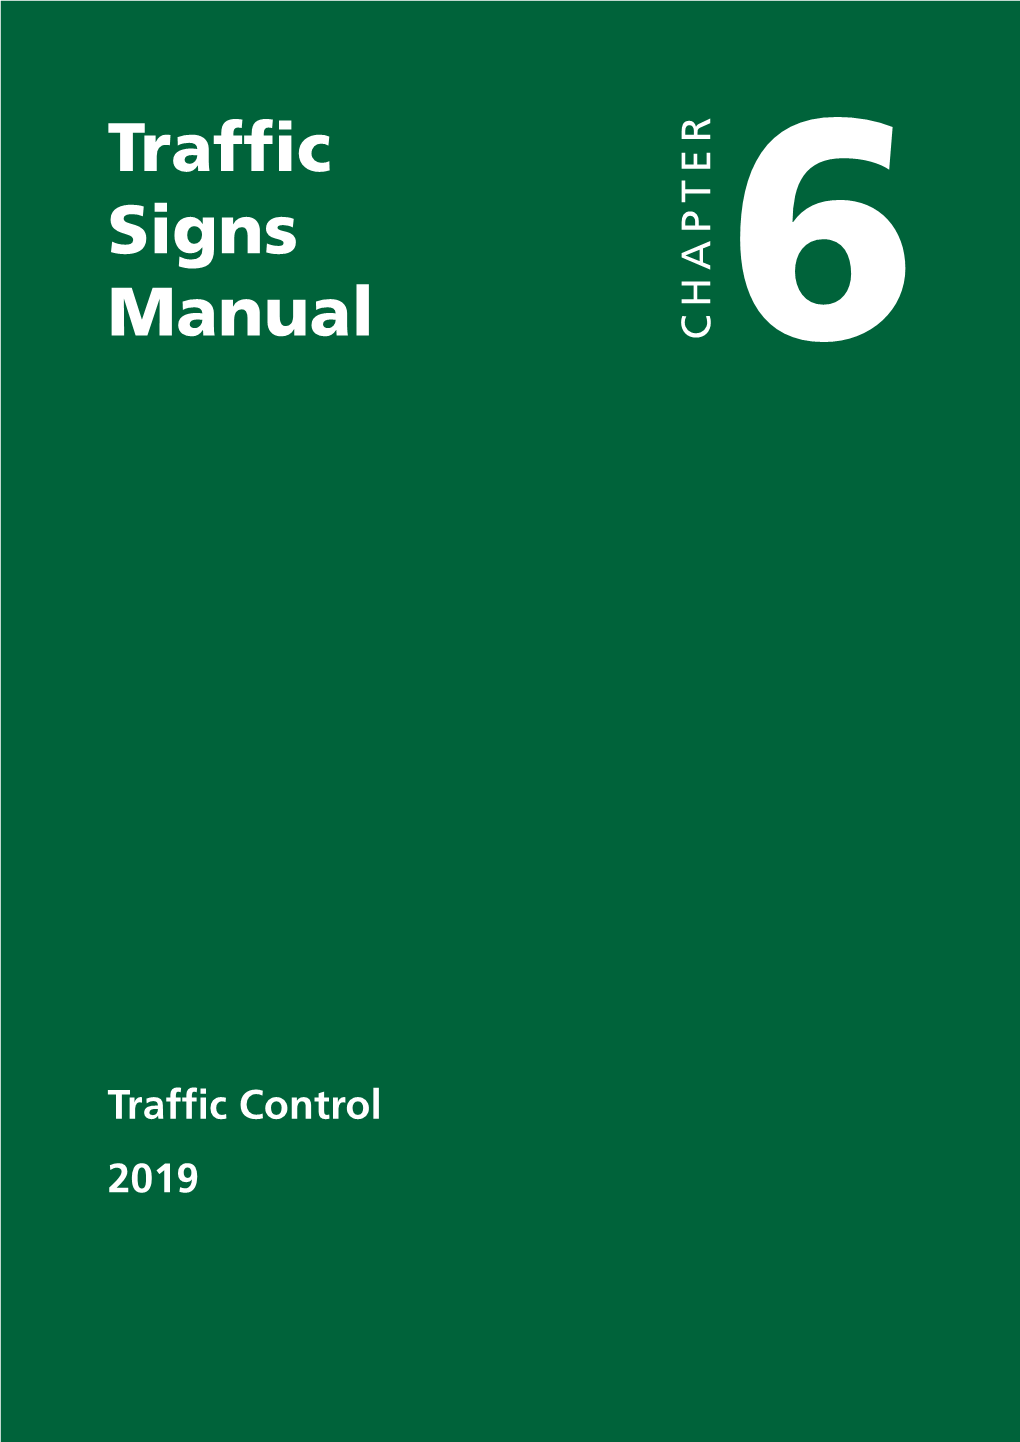 Traffic Signs Manual – Chapter 6 Traffic Signs Manual CHAPTER 6 2019